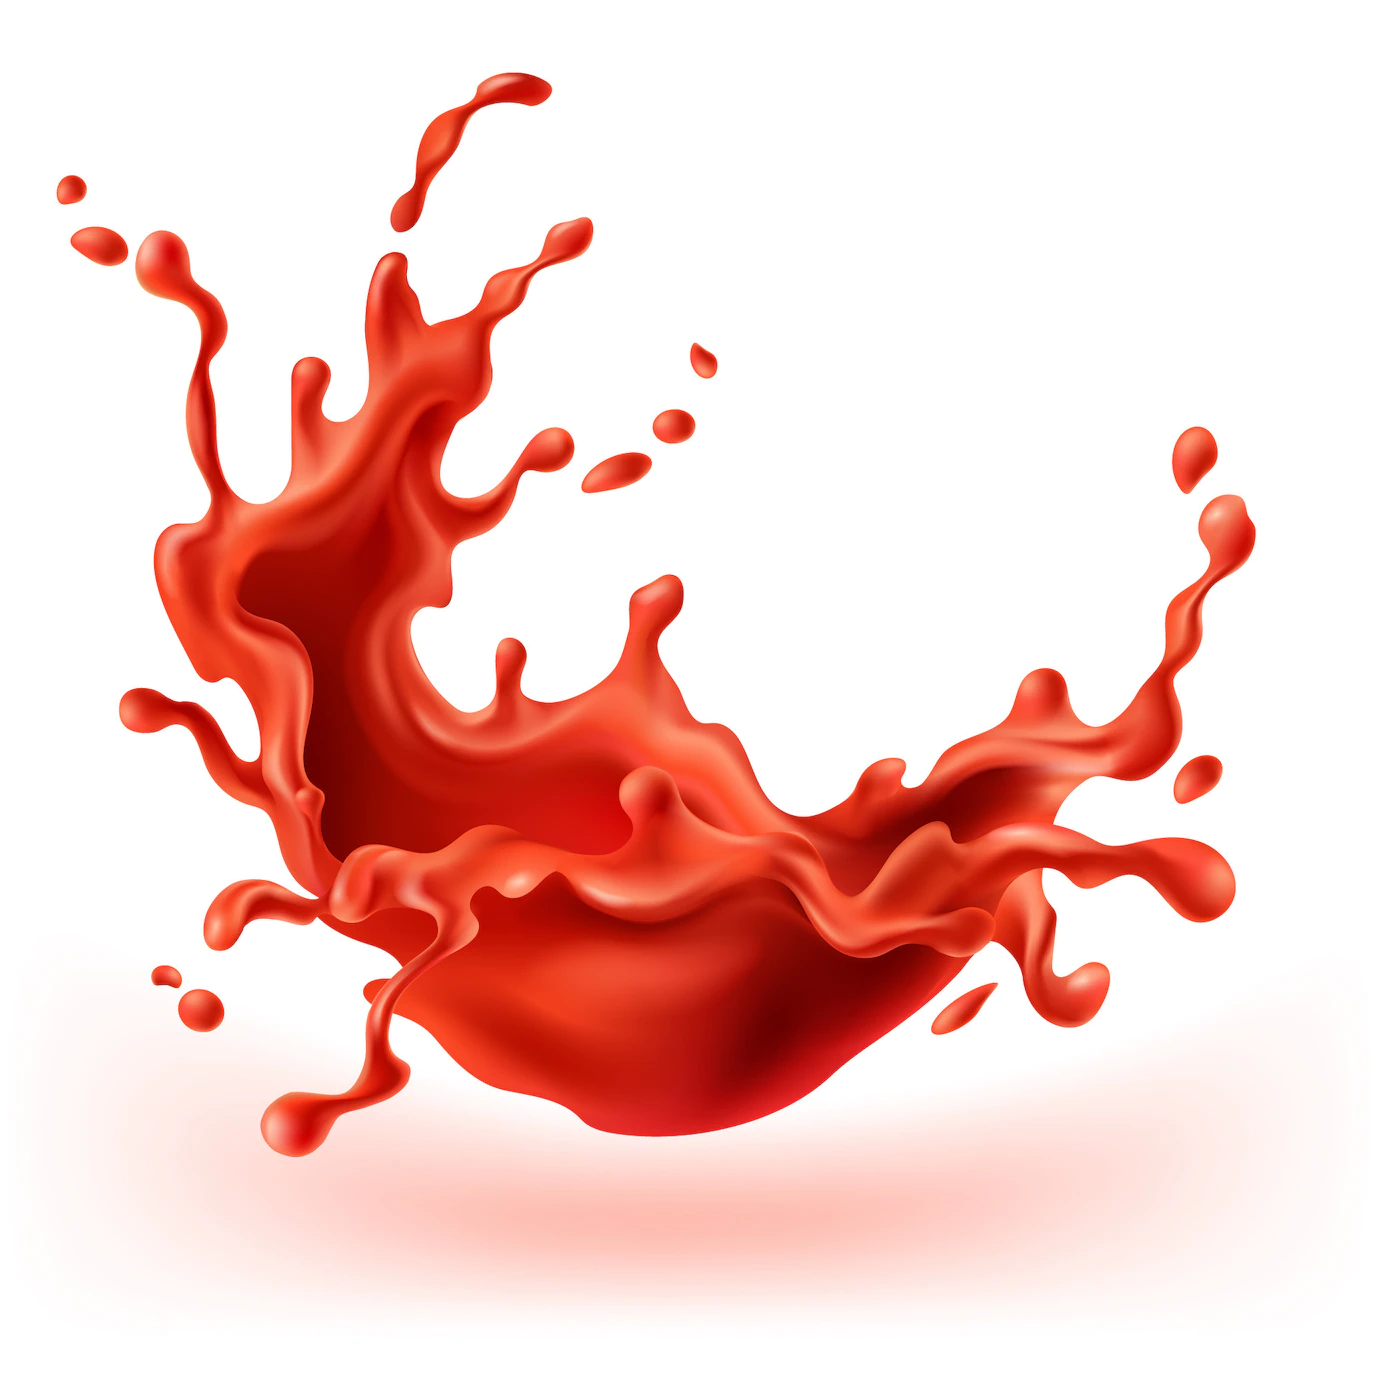 Red Tomato Splashing Juice Paint Splash With Drops Blobs Blots With Shadow 1441 2328